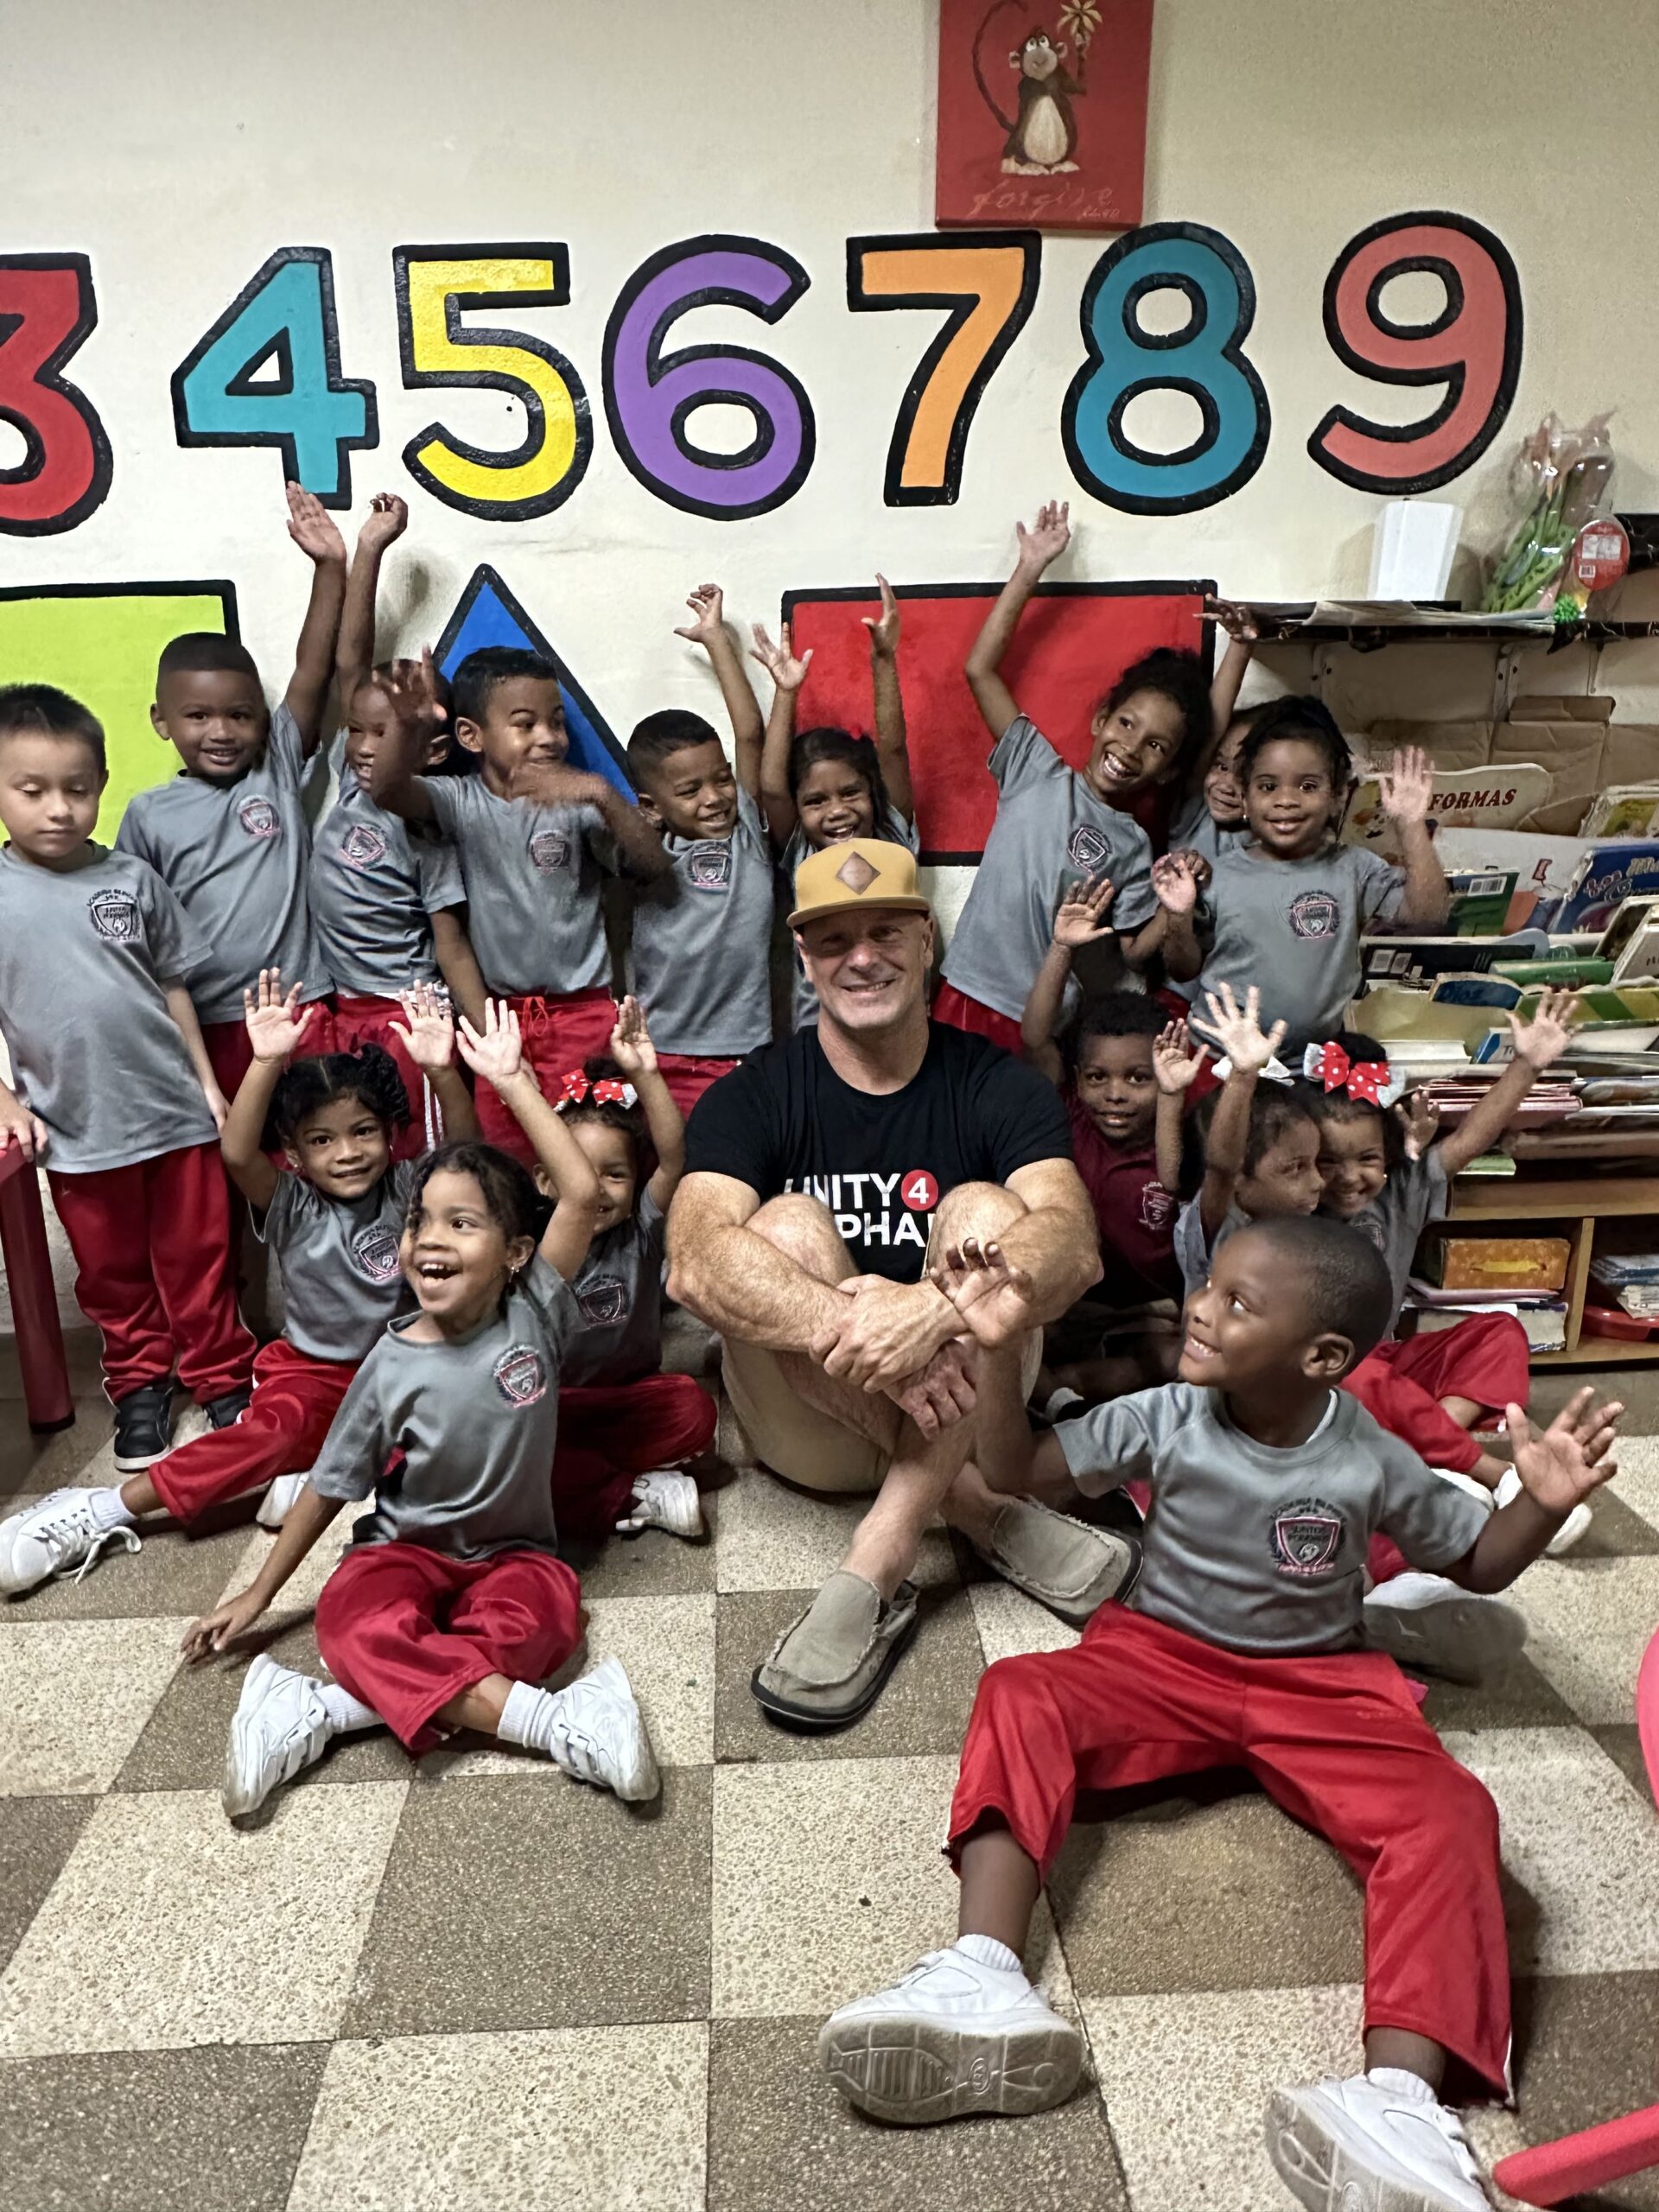 A group of vulnerable children with their hands raised smiling excitedly while surrounding U4O founder Joe Brandi sitting on the floor smiling.